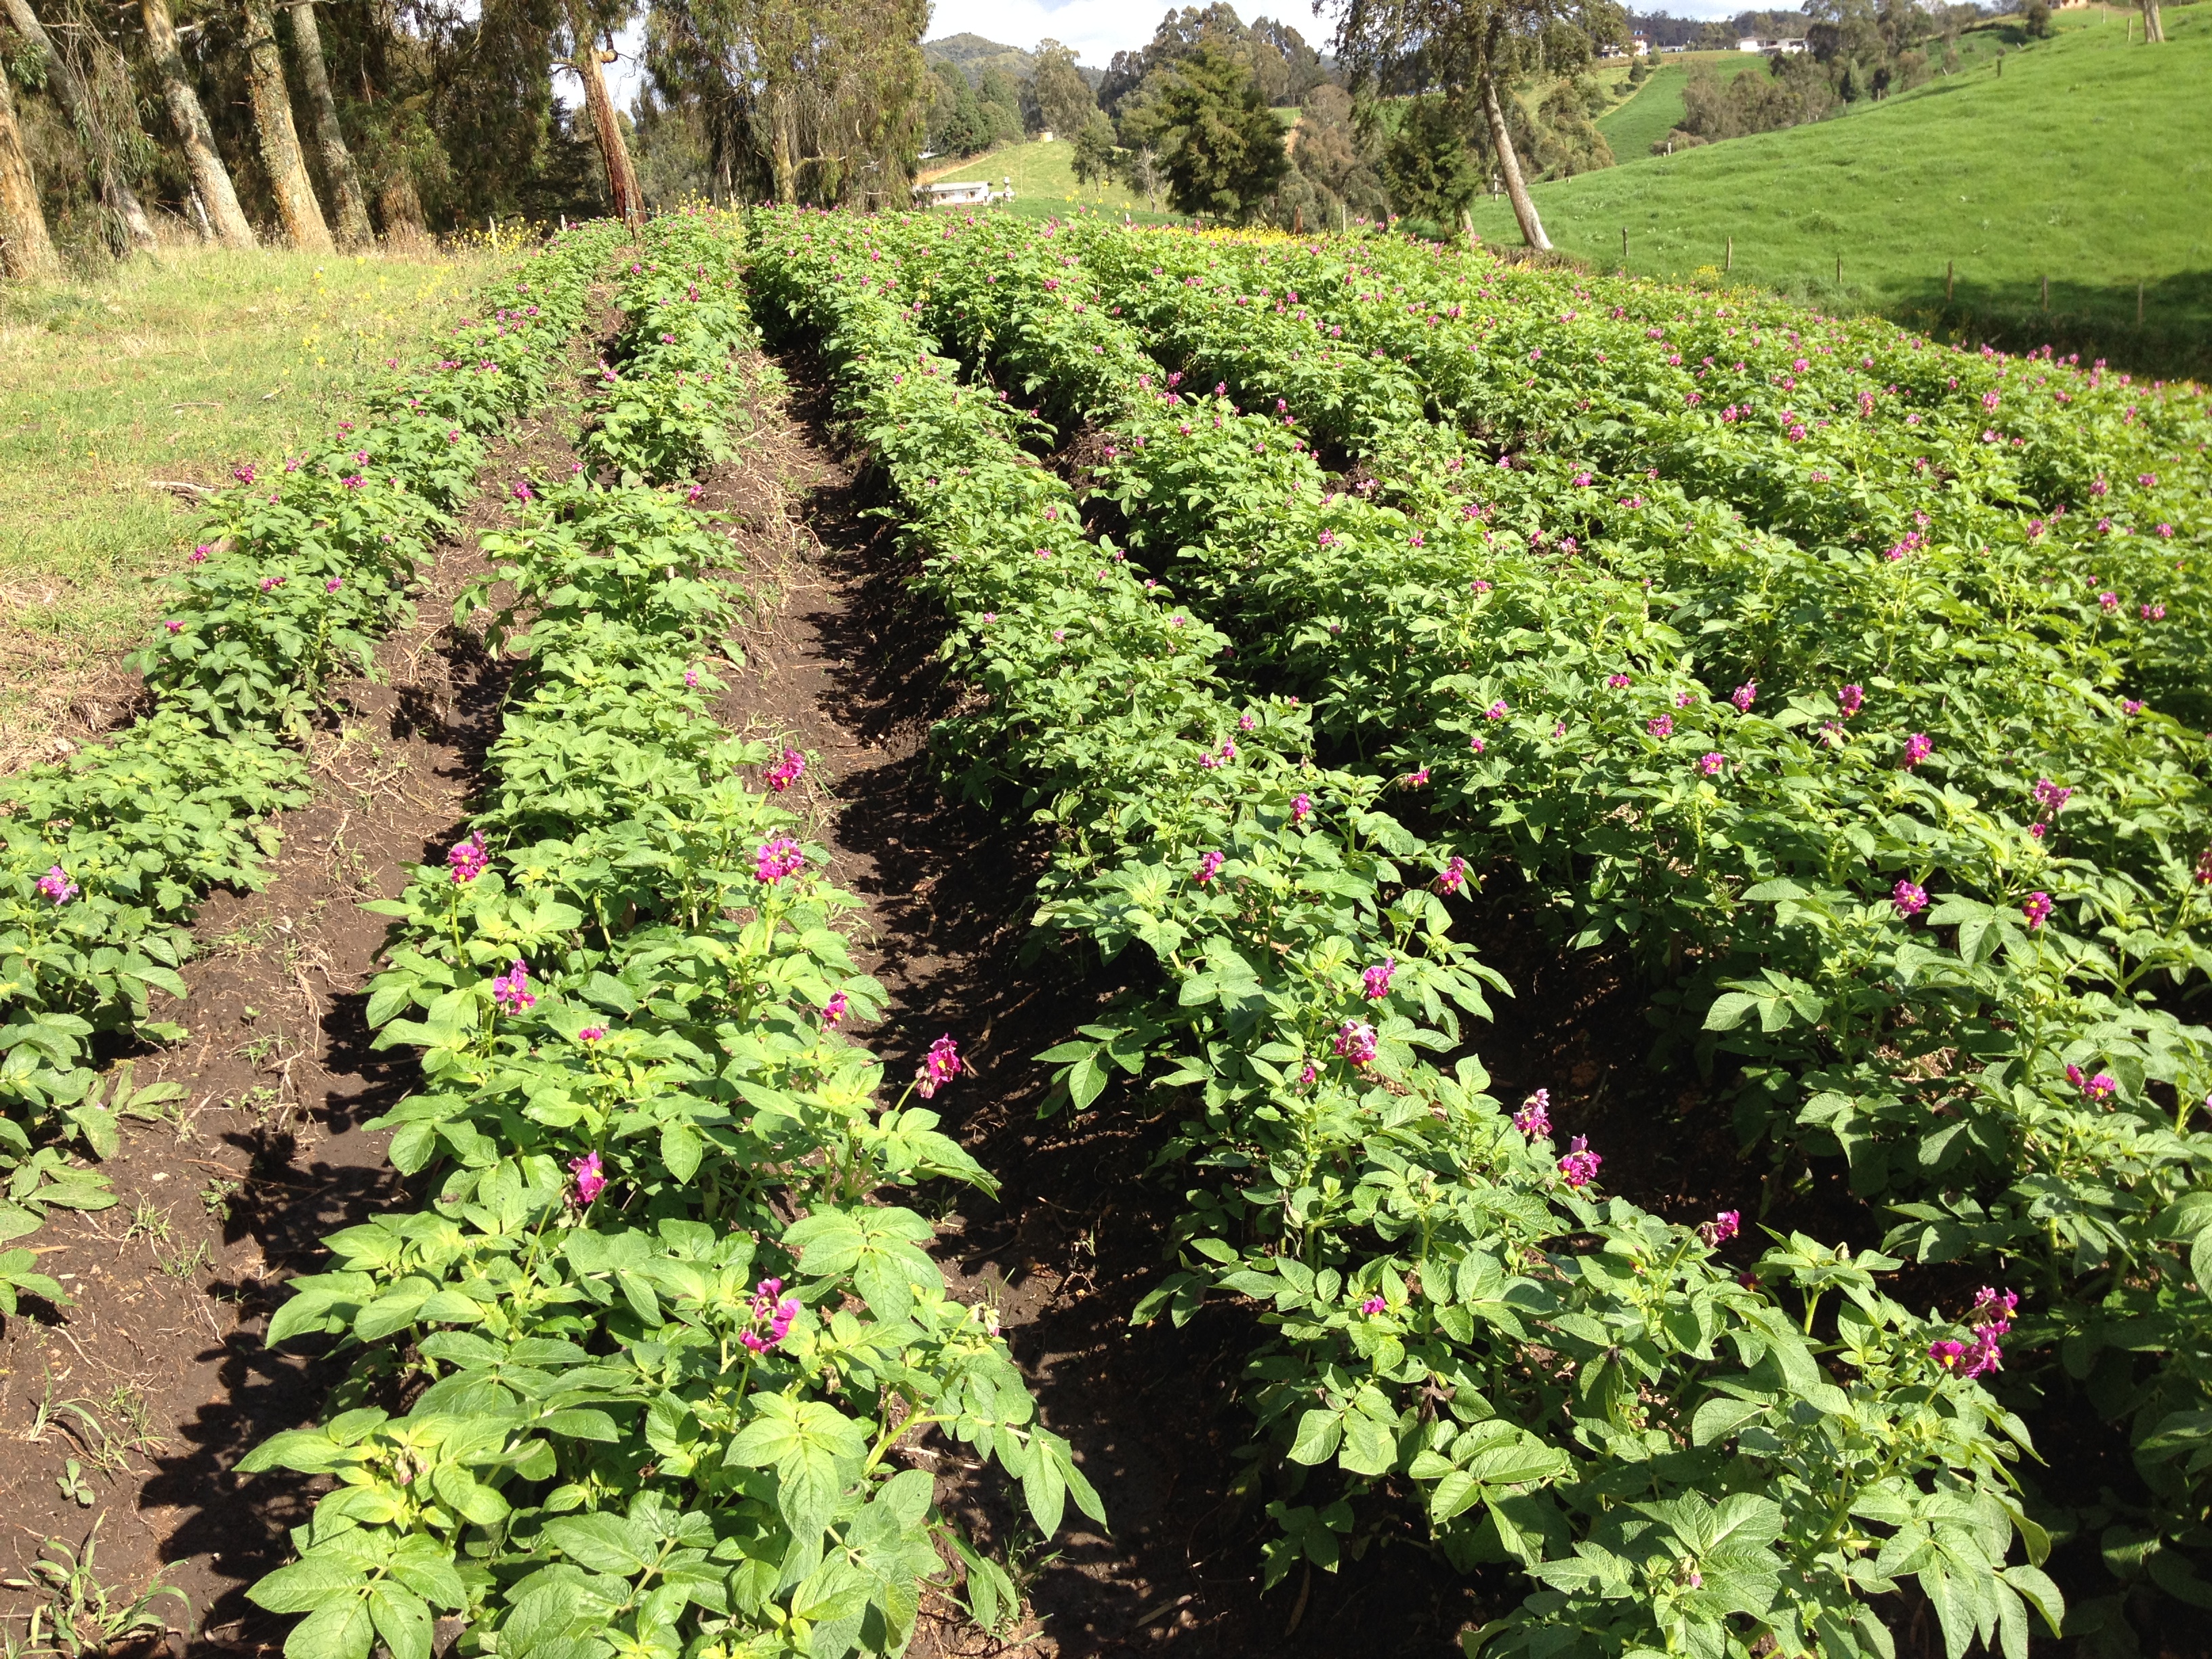 View of the experimental field at 60 days after planting. Photo: T.M. Saldaña-Villota